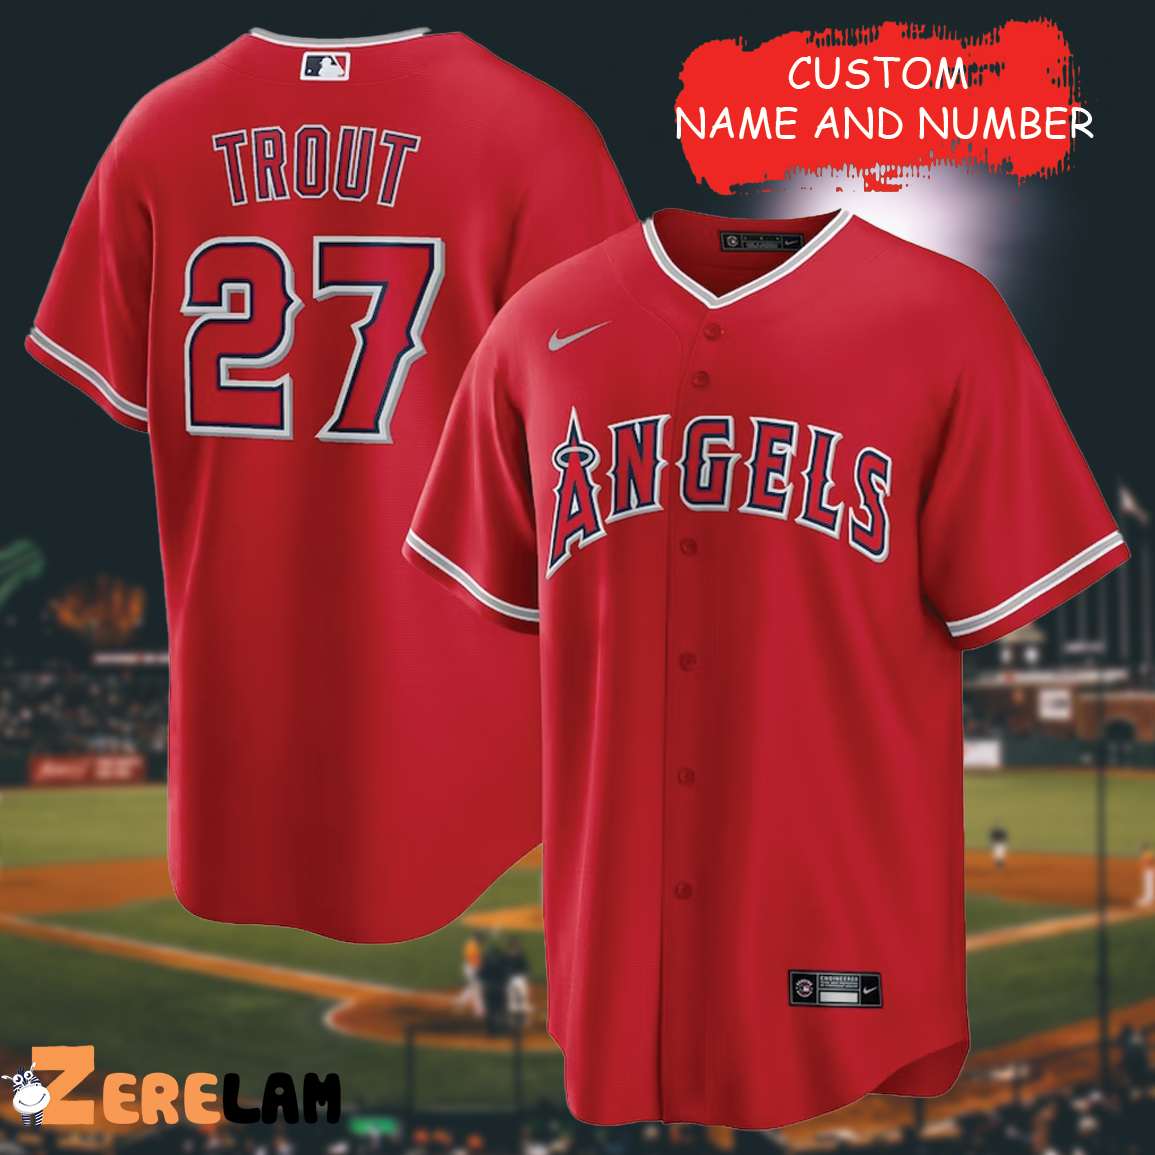 trout 27 jersey